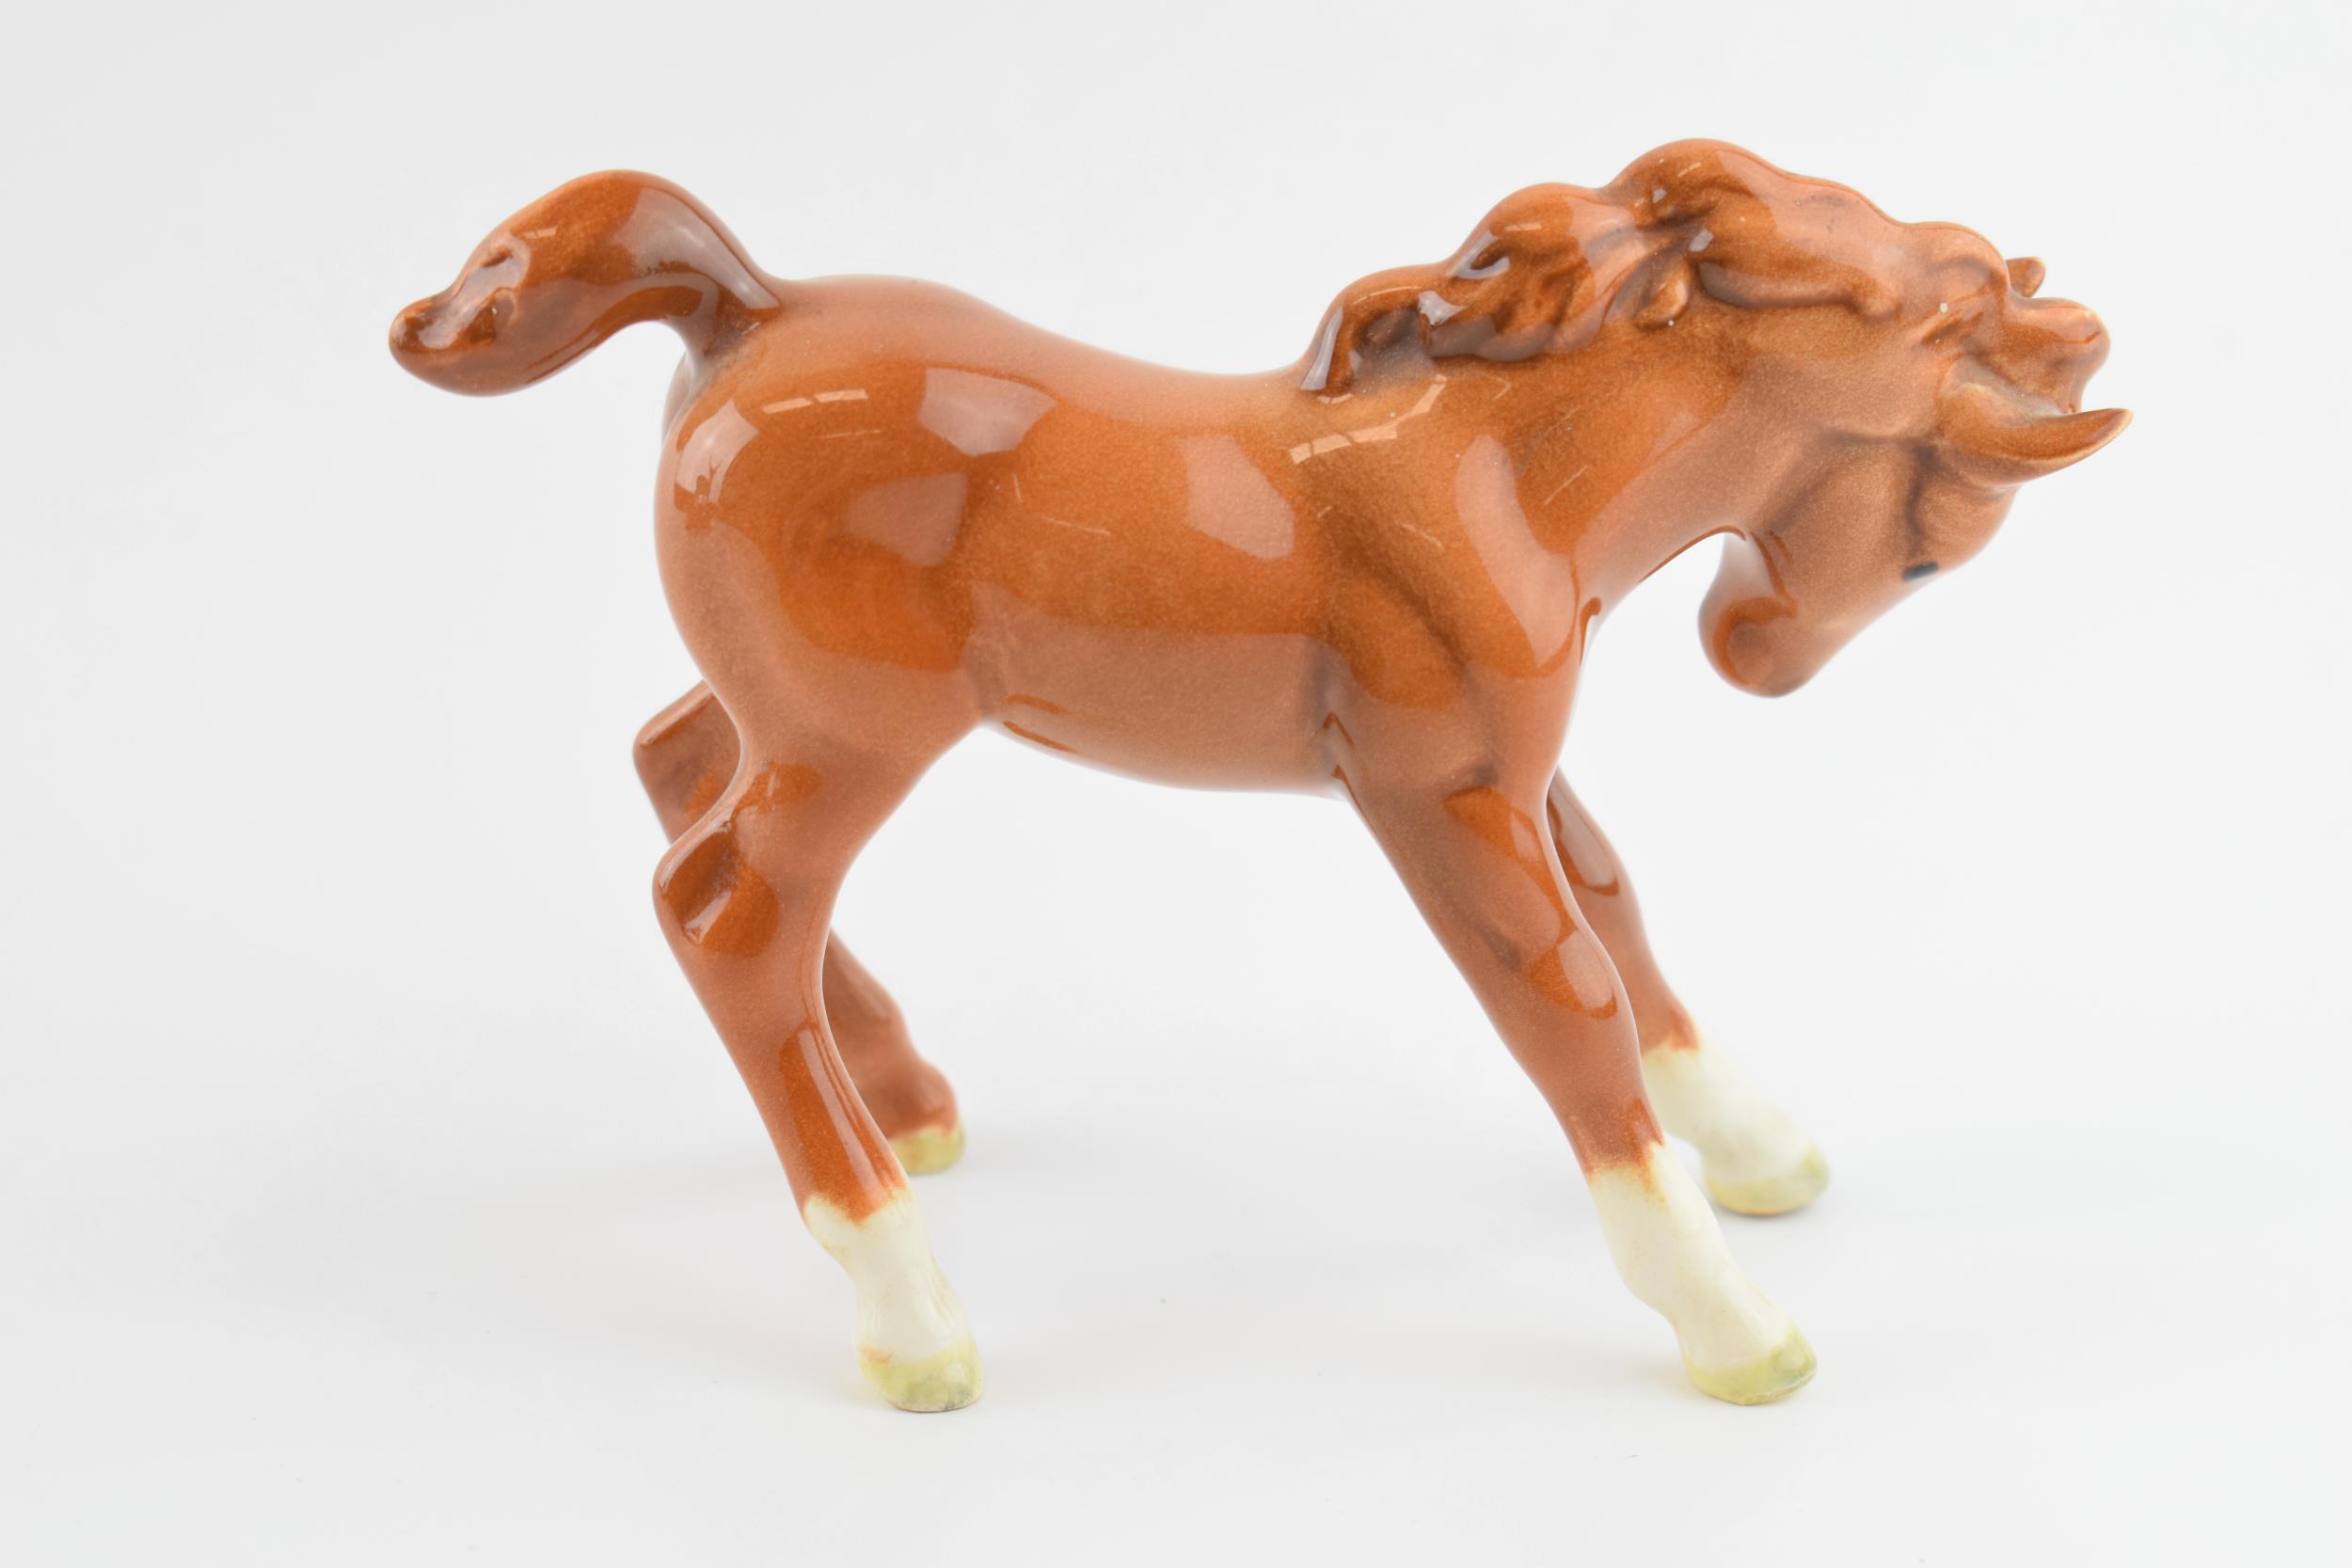 Beswick Chestnut head down foal 1085. In good condition with no obvious damage or restoration. - Image 2 of 3